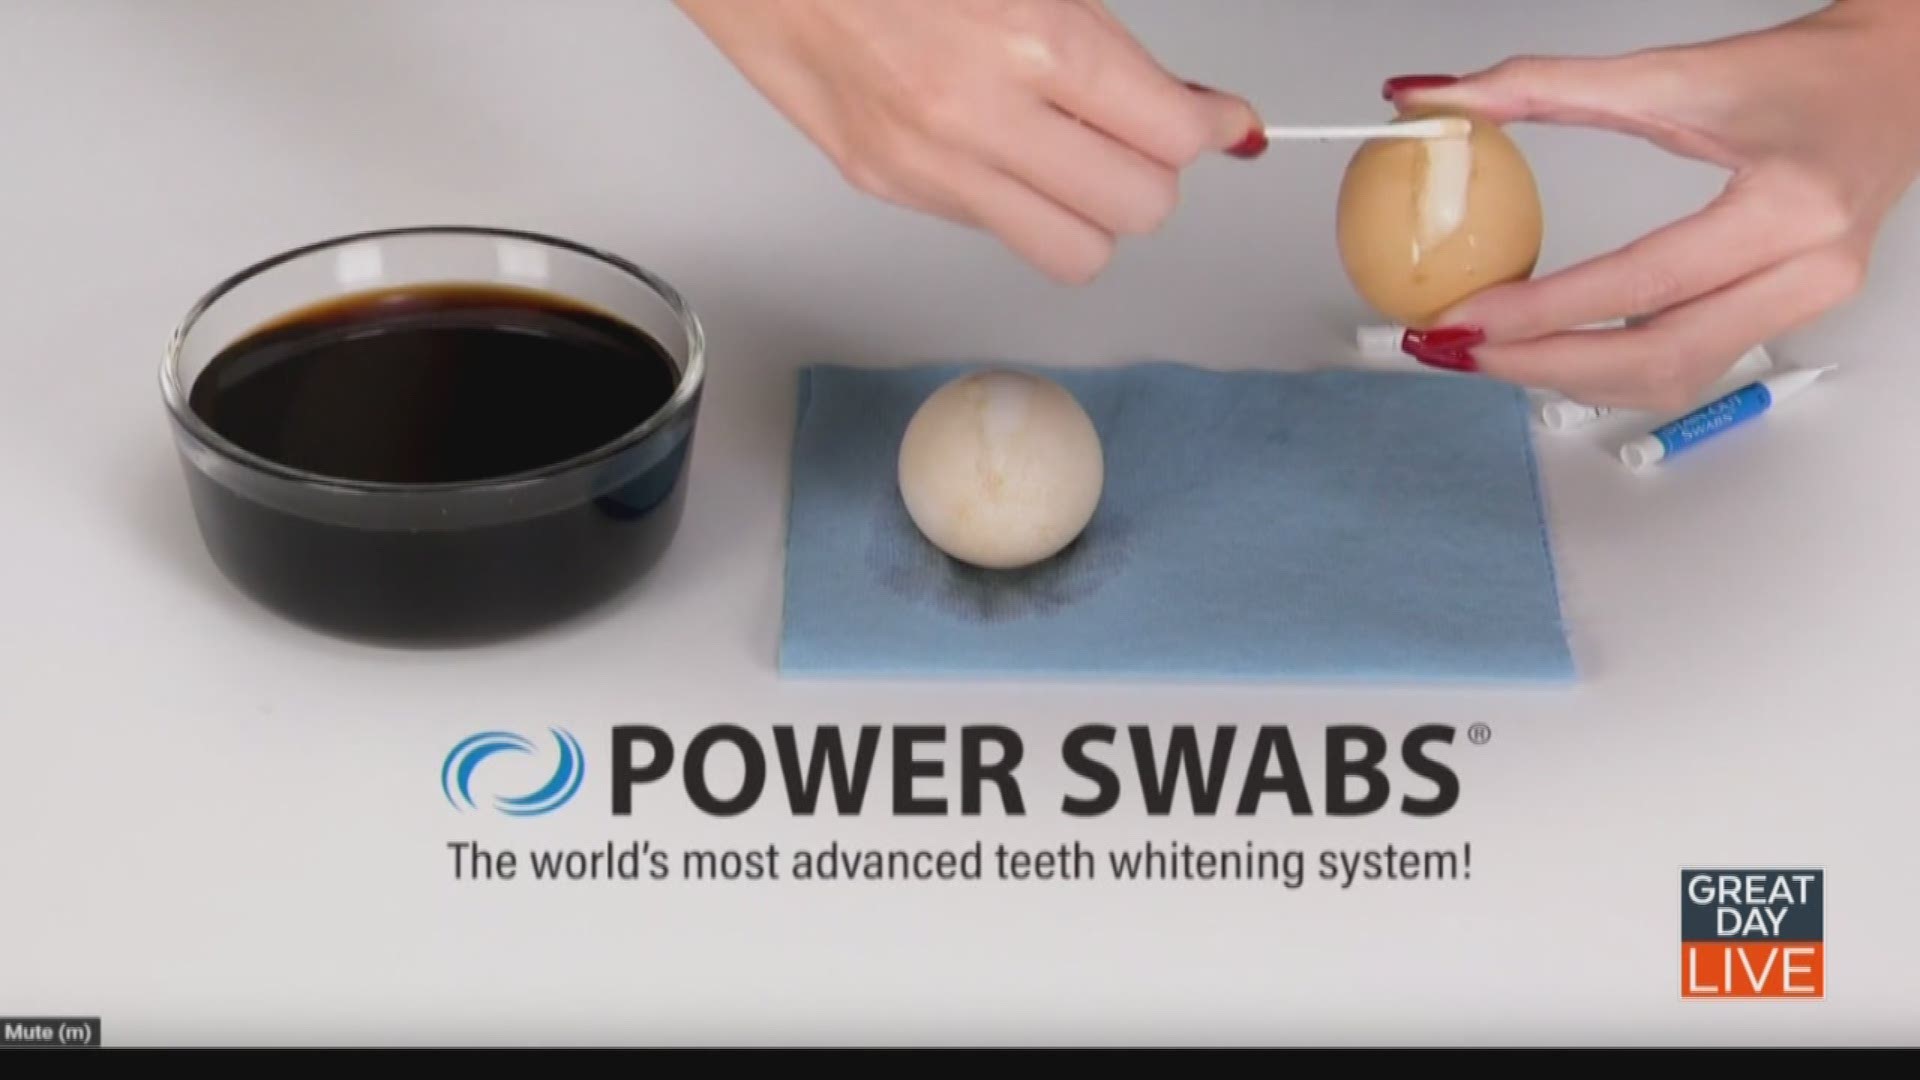 Paid content:  Sponsored by Power Swabs.